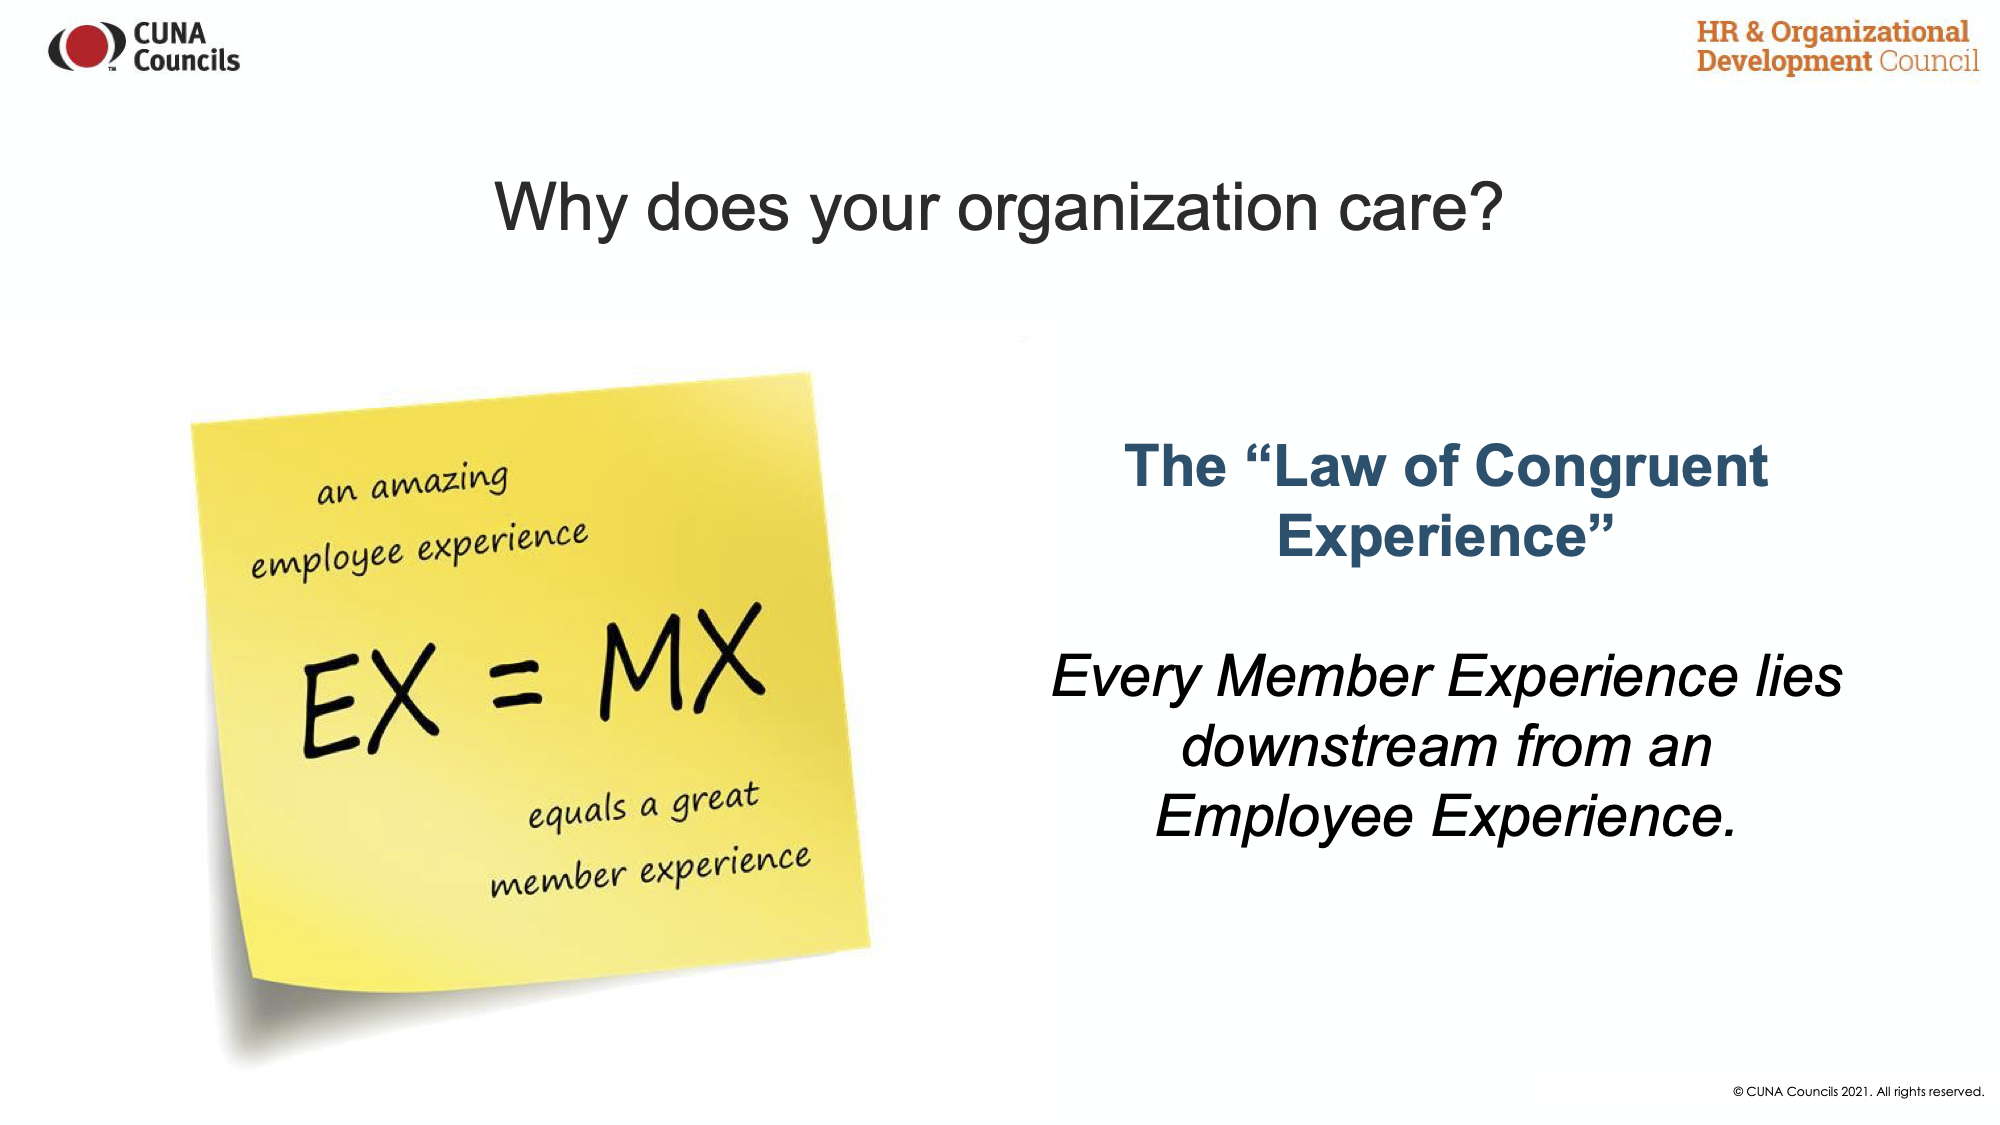 The Law of Congruent Experiences states that an amazing employee experience equals a great member experience.